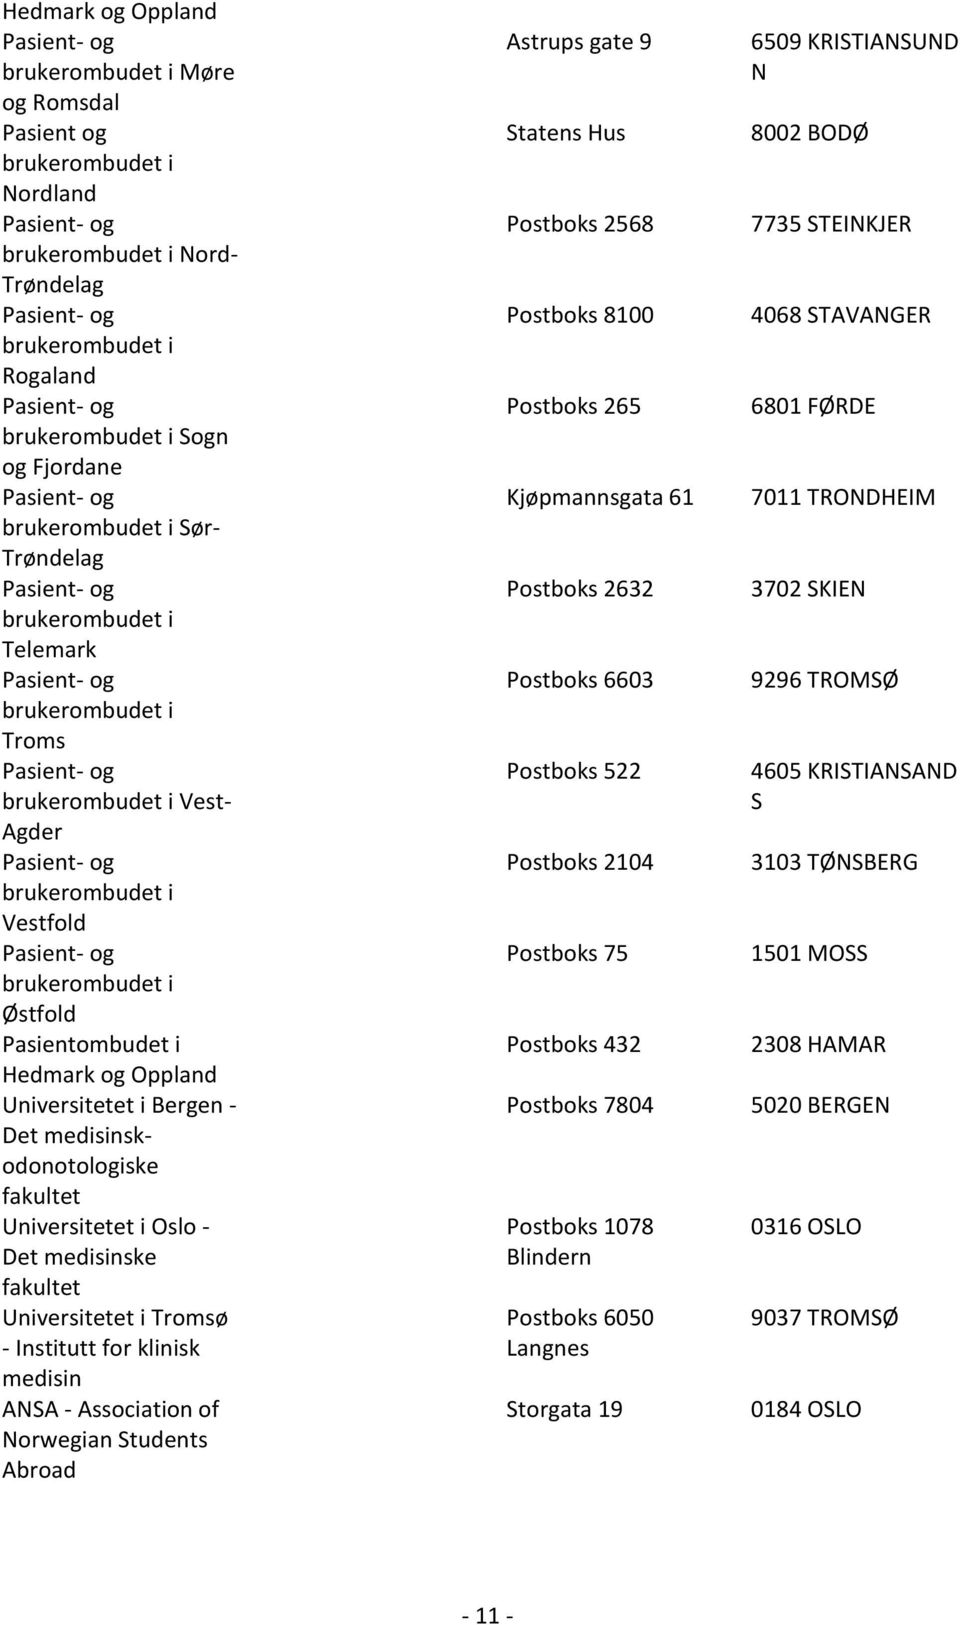 Students Abroad Astrups gate 9 Statens Hus Postboks 2568 Postboks 8100 Postboks 265 Kjøpmannsgata 61 Postboks 2632 Postboks 6603 Postboks 522 Postboks 2104 Postboks 75 Postboks 432 Postboks 7804